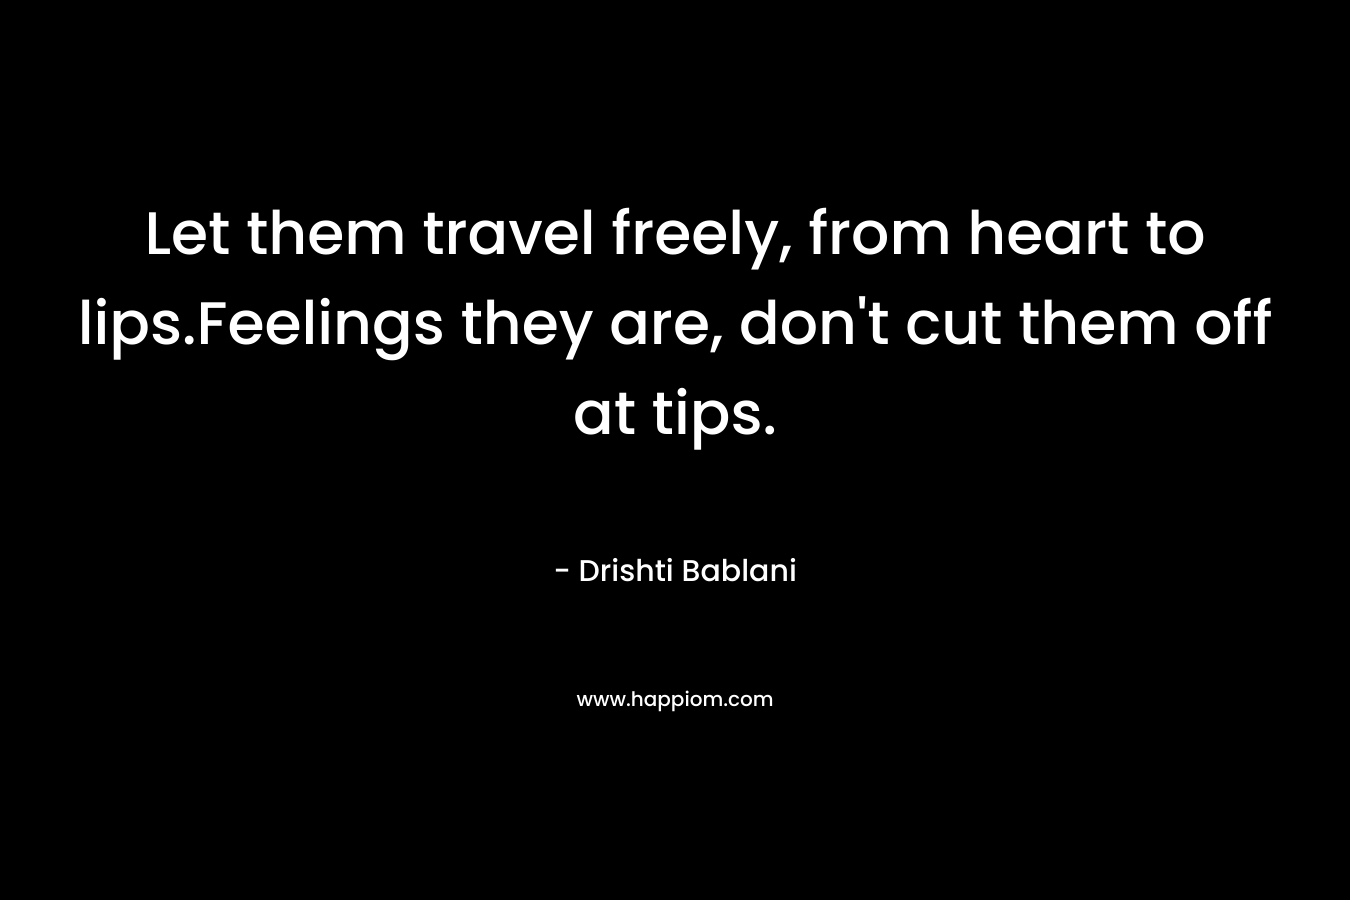 Let them travel freely, from heart to lips.Feelings they are, don’t cut them off at tips. – Drishti Bablani